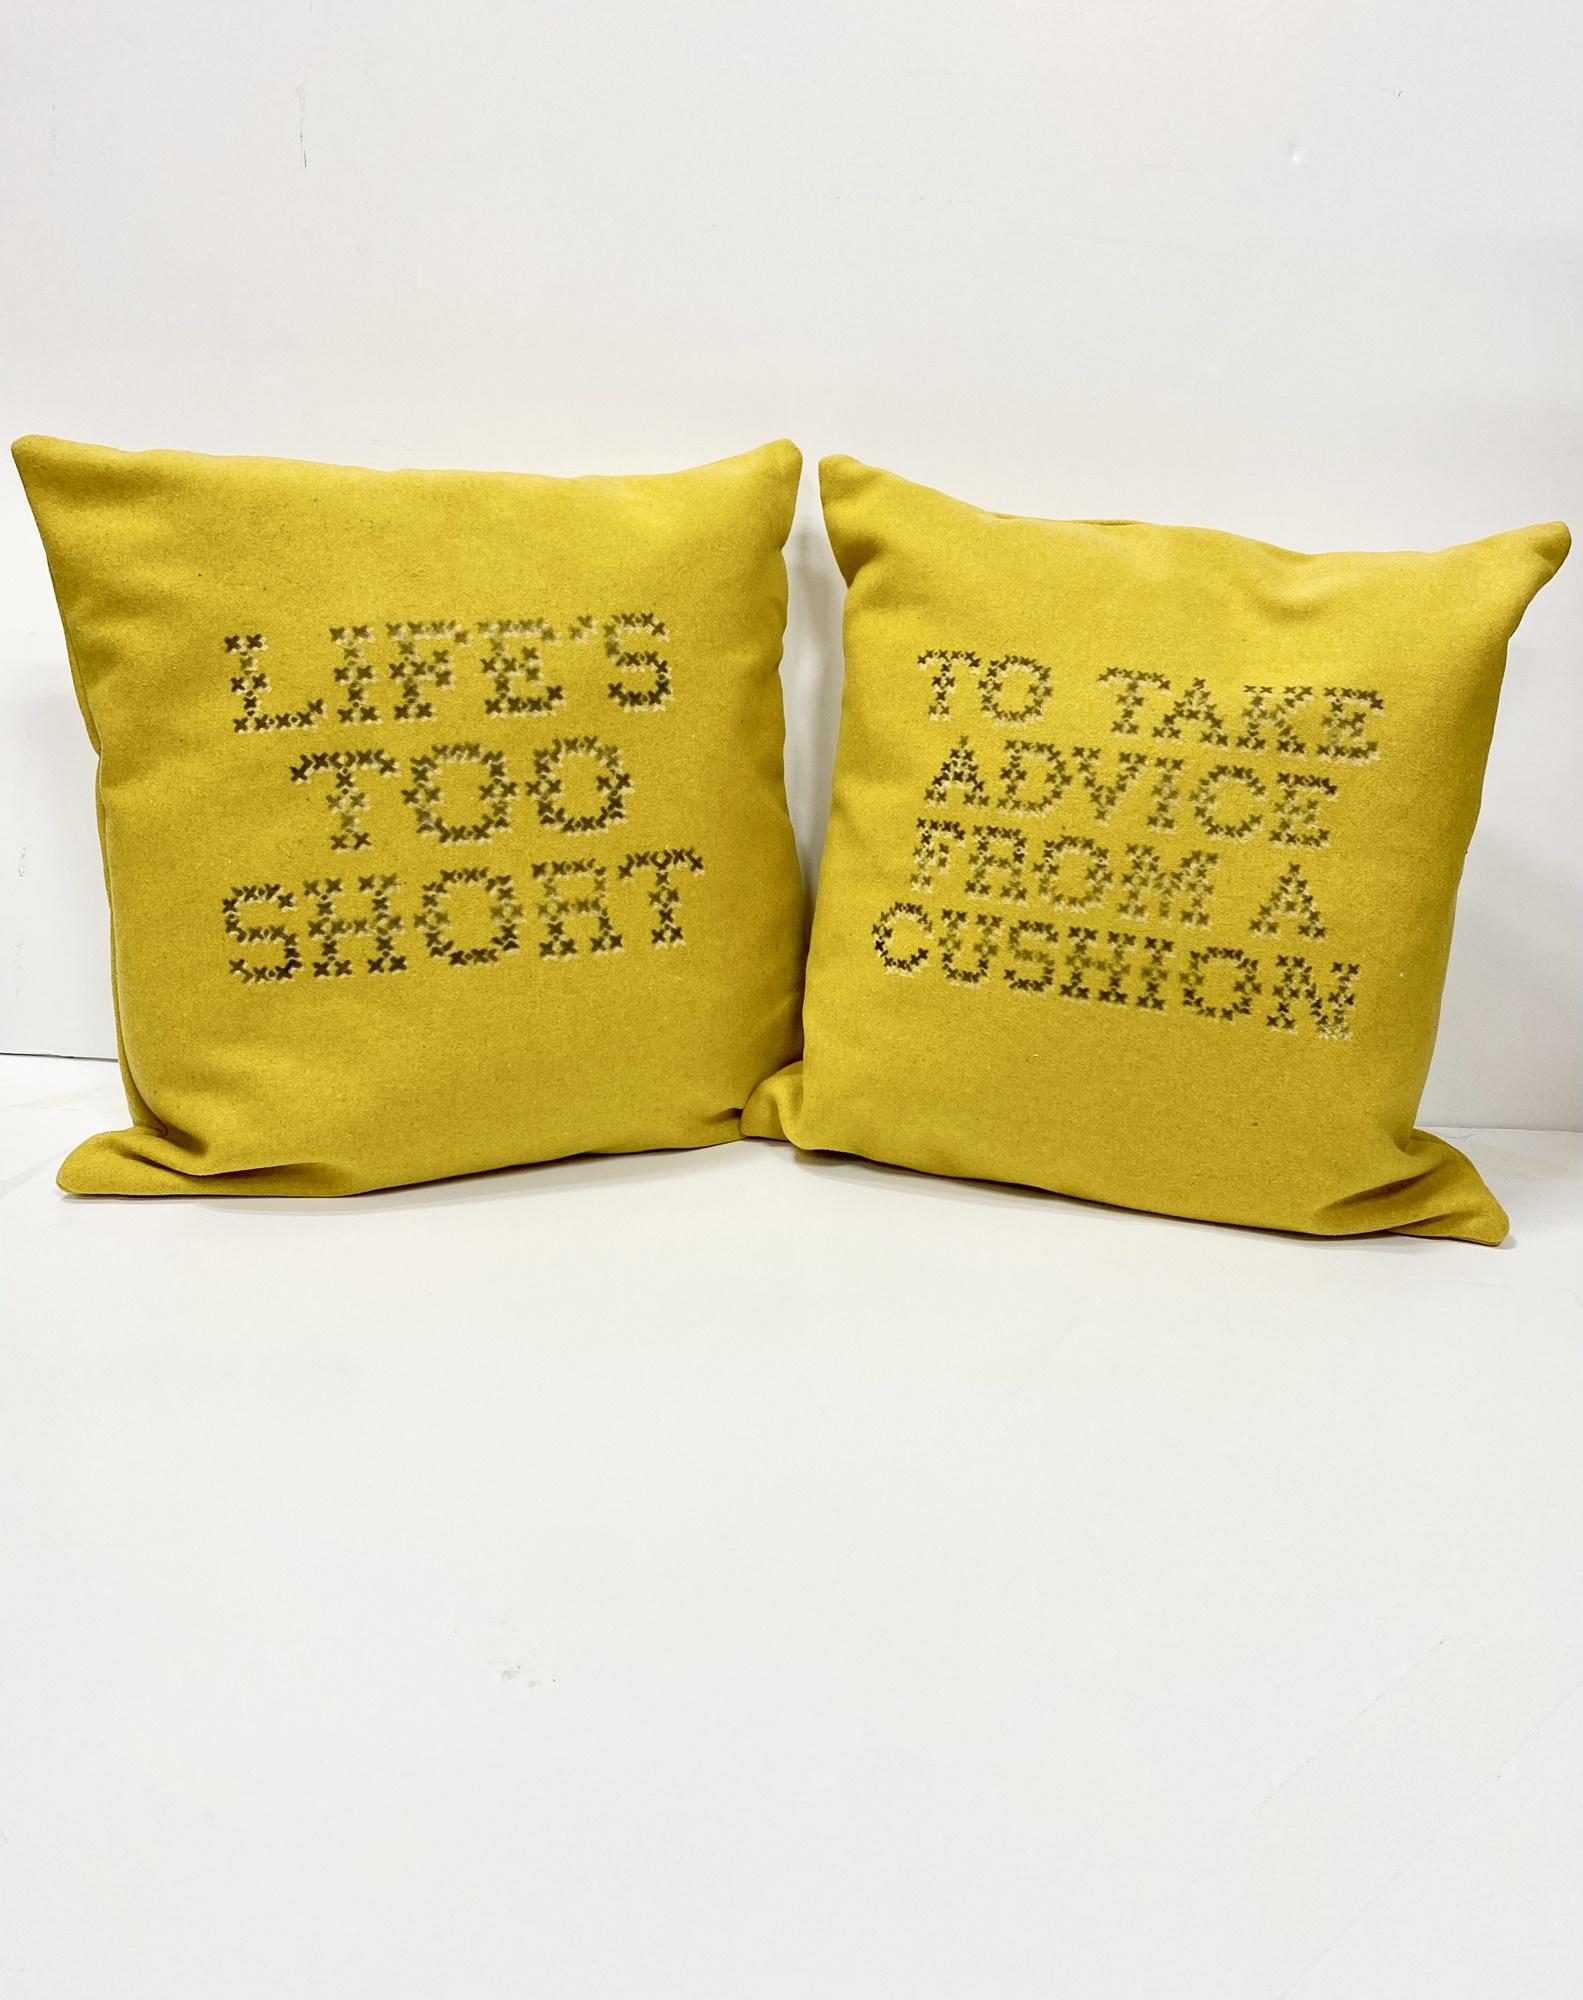 Banksy Still-Life Painting - "Life´s to short to take advice from a cushion", 2019.